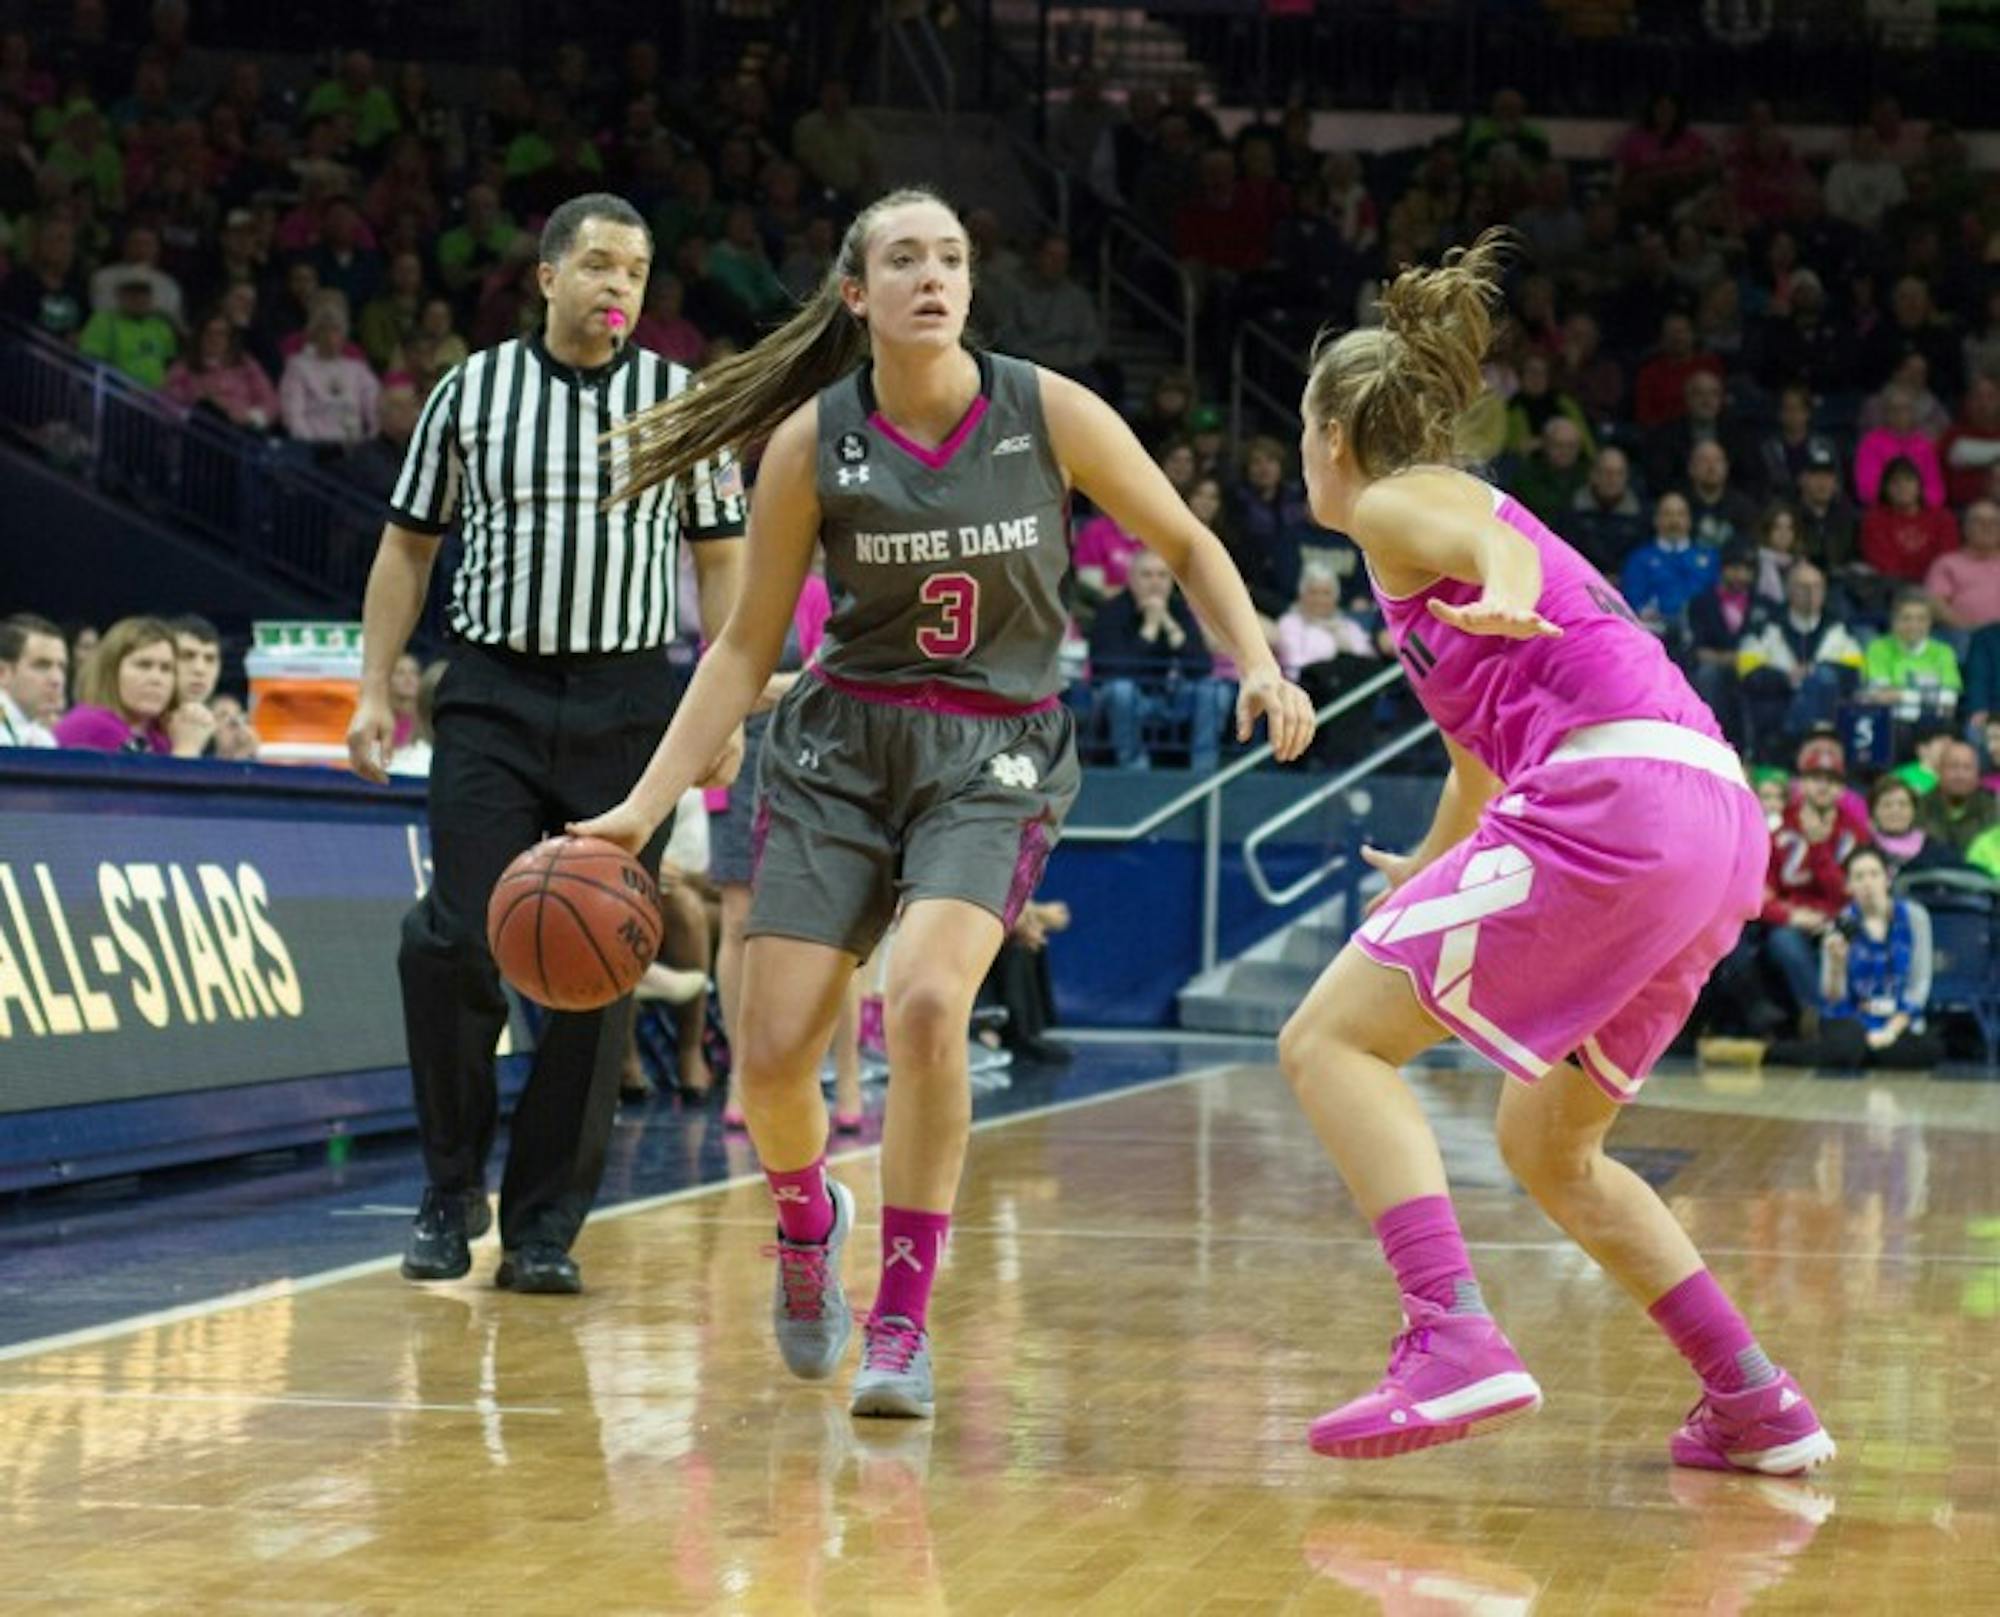 Irish freshman guard Marina Mabrey looks for a passing lane during Notre Dame’s 90-69 victory over Miami on Feb. 13 at Purcell Pavilion. Mabrey scored 14 points and grabbed six rebounds in the game, and for the season the freshman is averaging 11.4 points per game.